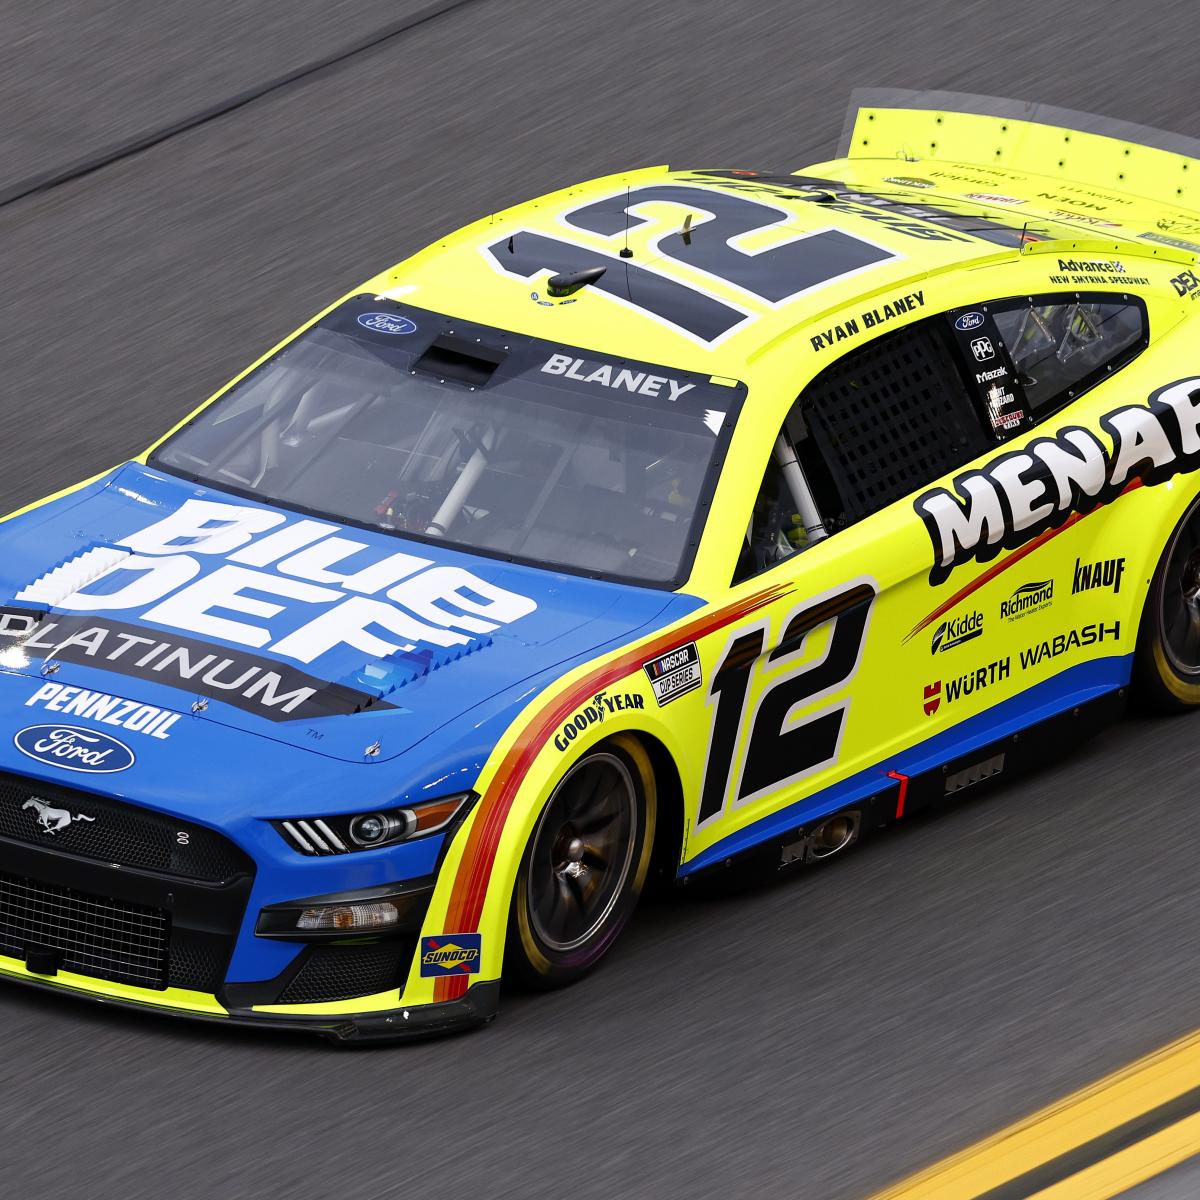 Nascar 2022 Schedule Nascar Duels 2022: Tv Schedule, Live-Stream Info And Predictions | Bleacher  Report | Latest News, Videos And Highlights